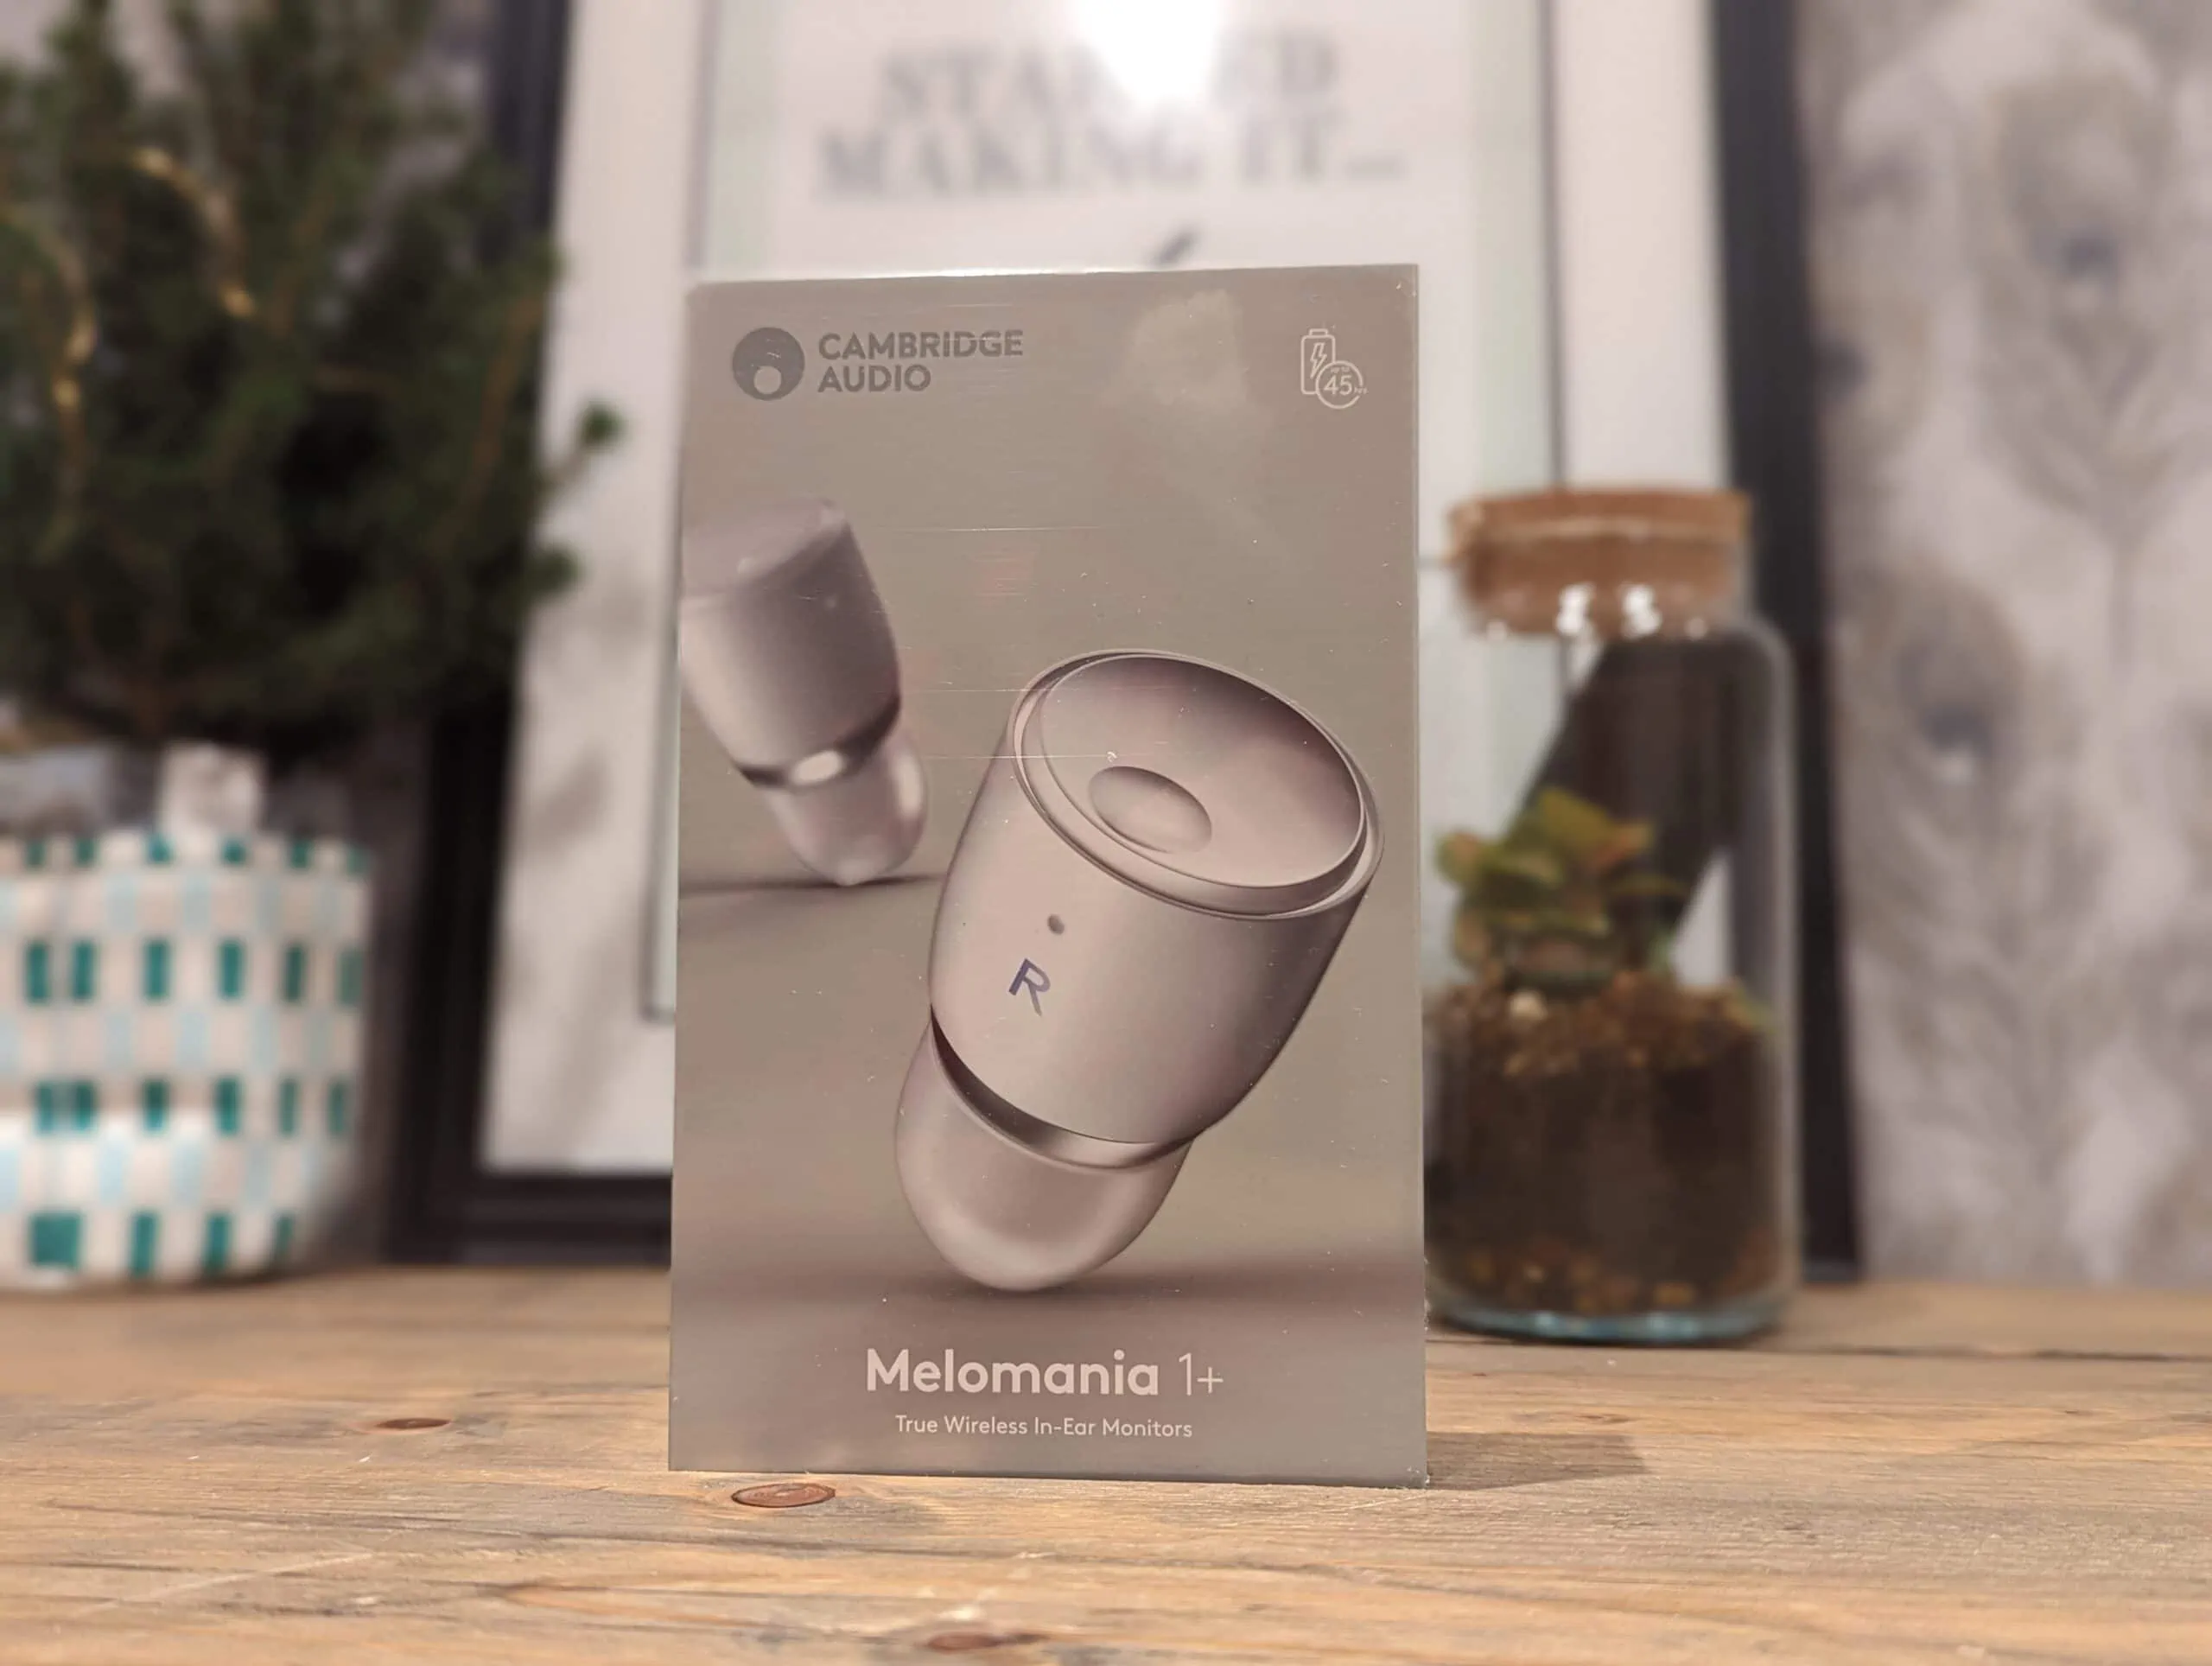 Cambridge Audio Melomania 1+ Competition – Win a pair of these awesome Cambridge Audio TWS earbuds